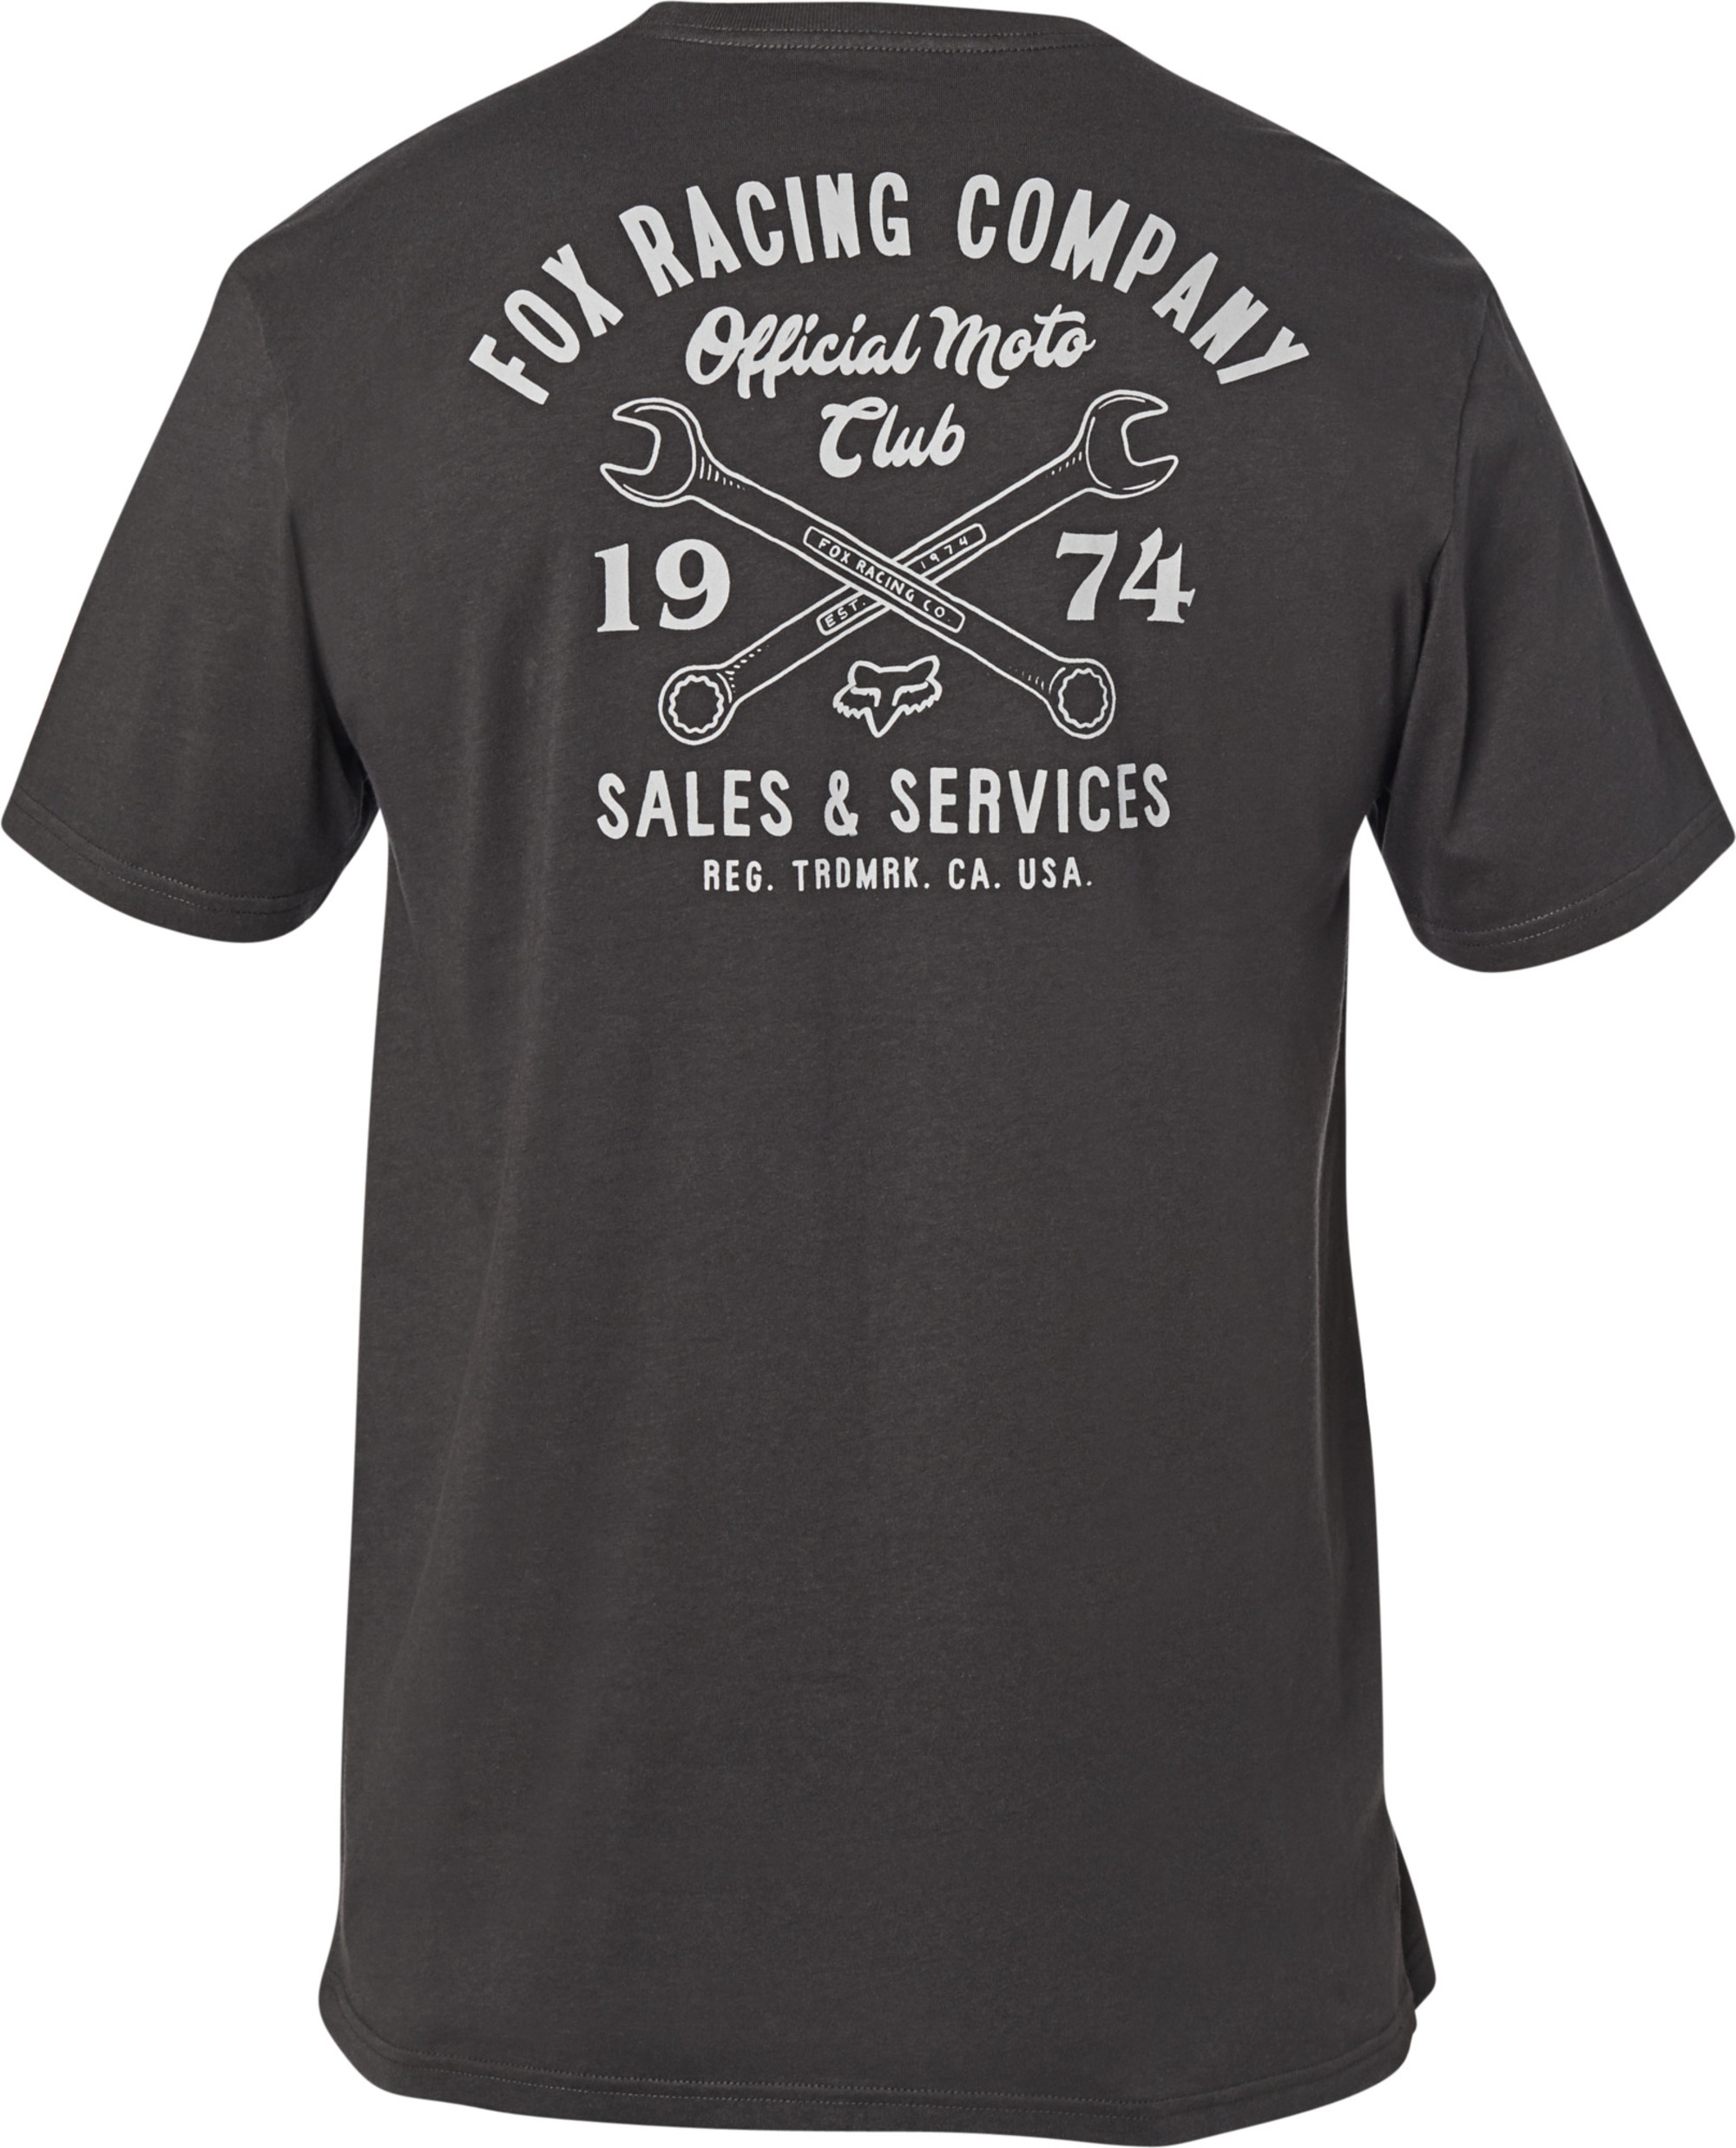 fox racing t-shirt shirts for men premium wrenched pckt